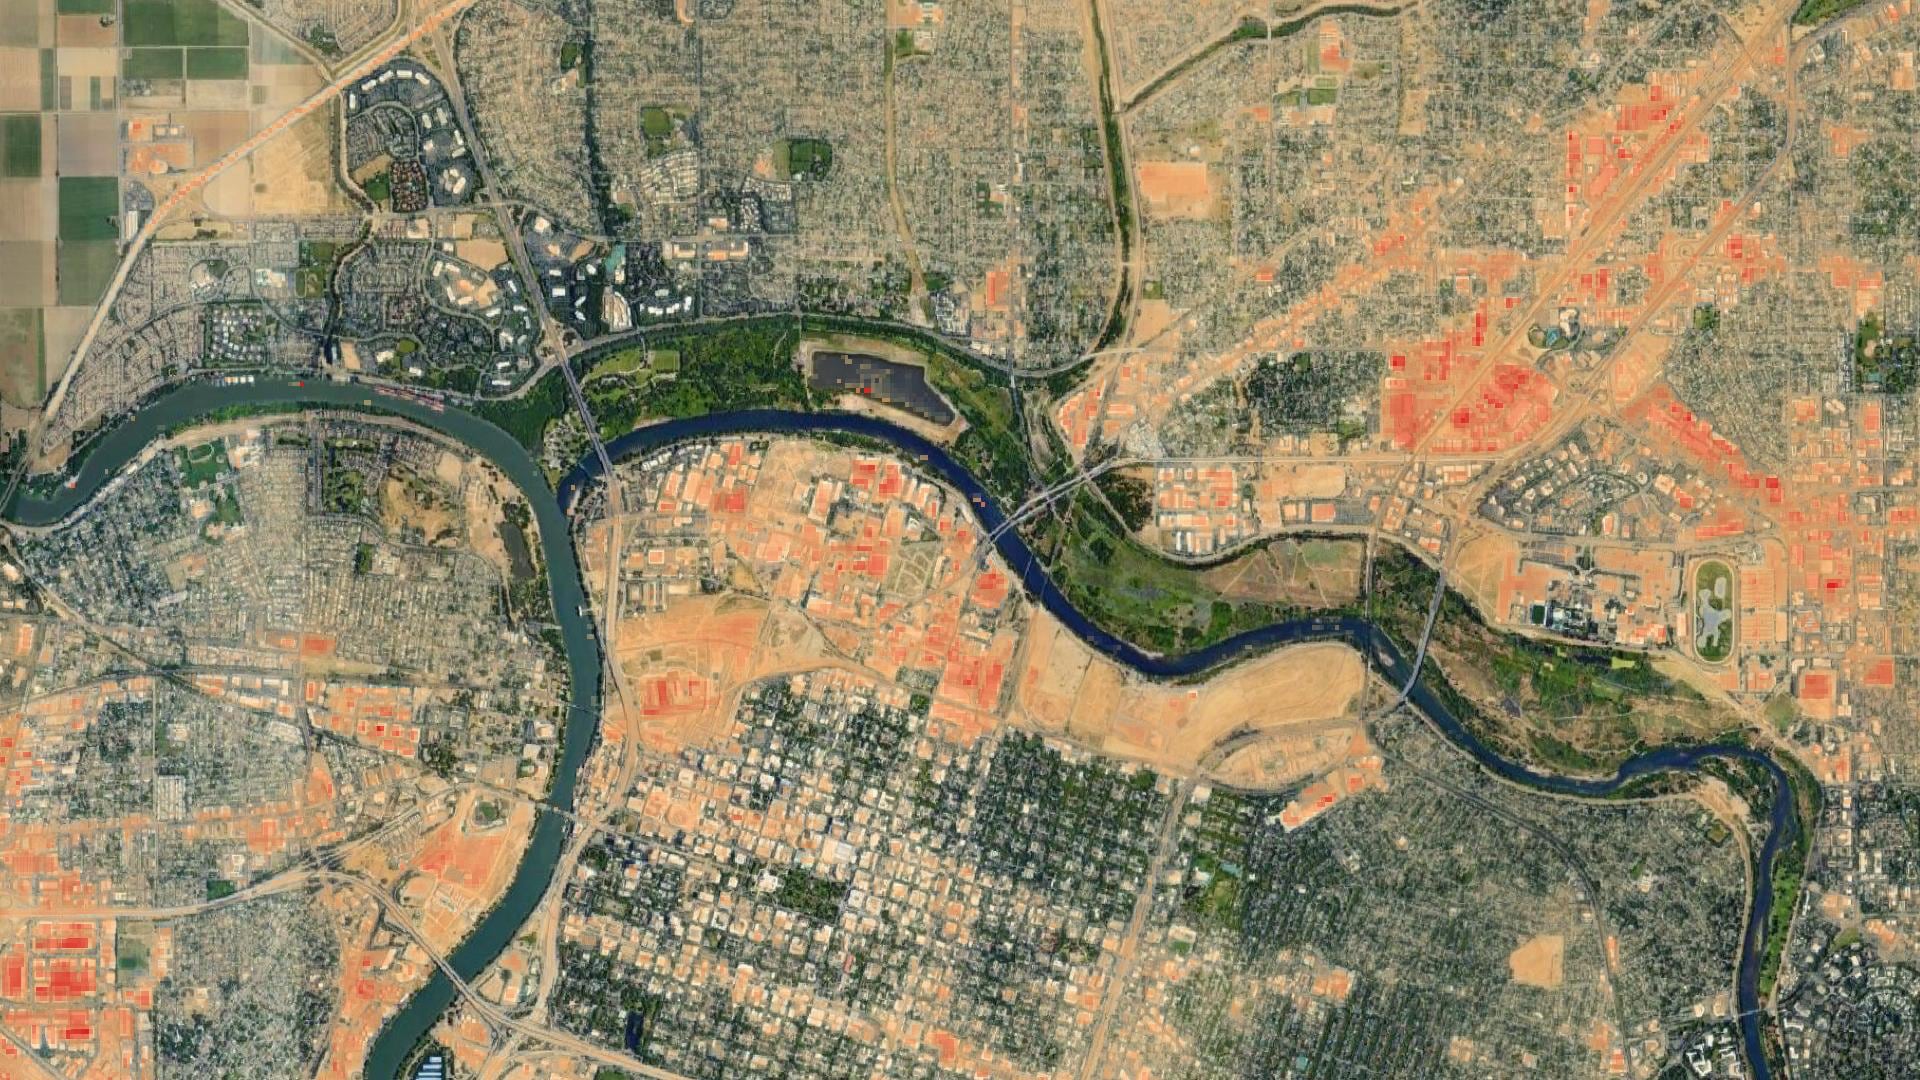 Mean land surface temperature derived from 2016-2020 Landsat 8 OLI/TIRS imagery in central Sacramento, located in the California central valley, is displayed. Orange coloring is used to indicate which areas experience the urban heat island effect, with darker colors indicating a higher magnitude of urban heat. The darkest orange colors indicate areas where the city should invest more in urban cooling infrastructure.   Keywords: Urban heat island, Landsat, California, Central Valley, Sacramento, Nicole Keller, Elspeth Gates, Anjelica Petsch, Karina Alvarez